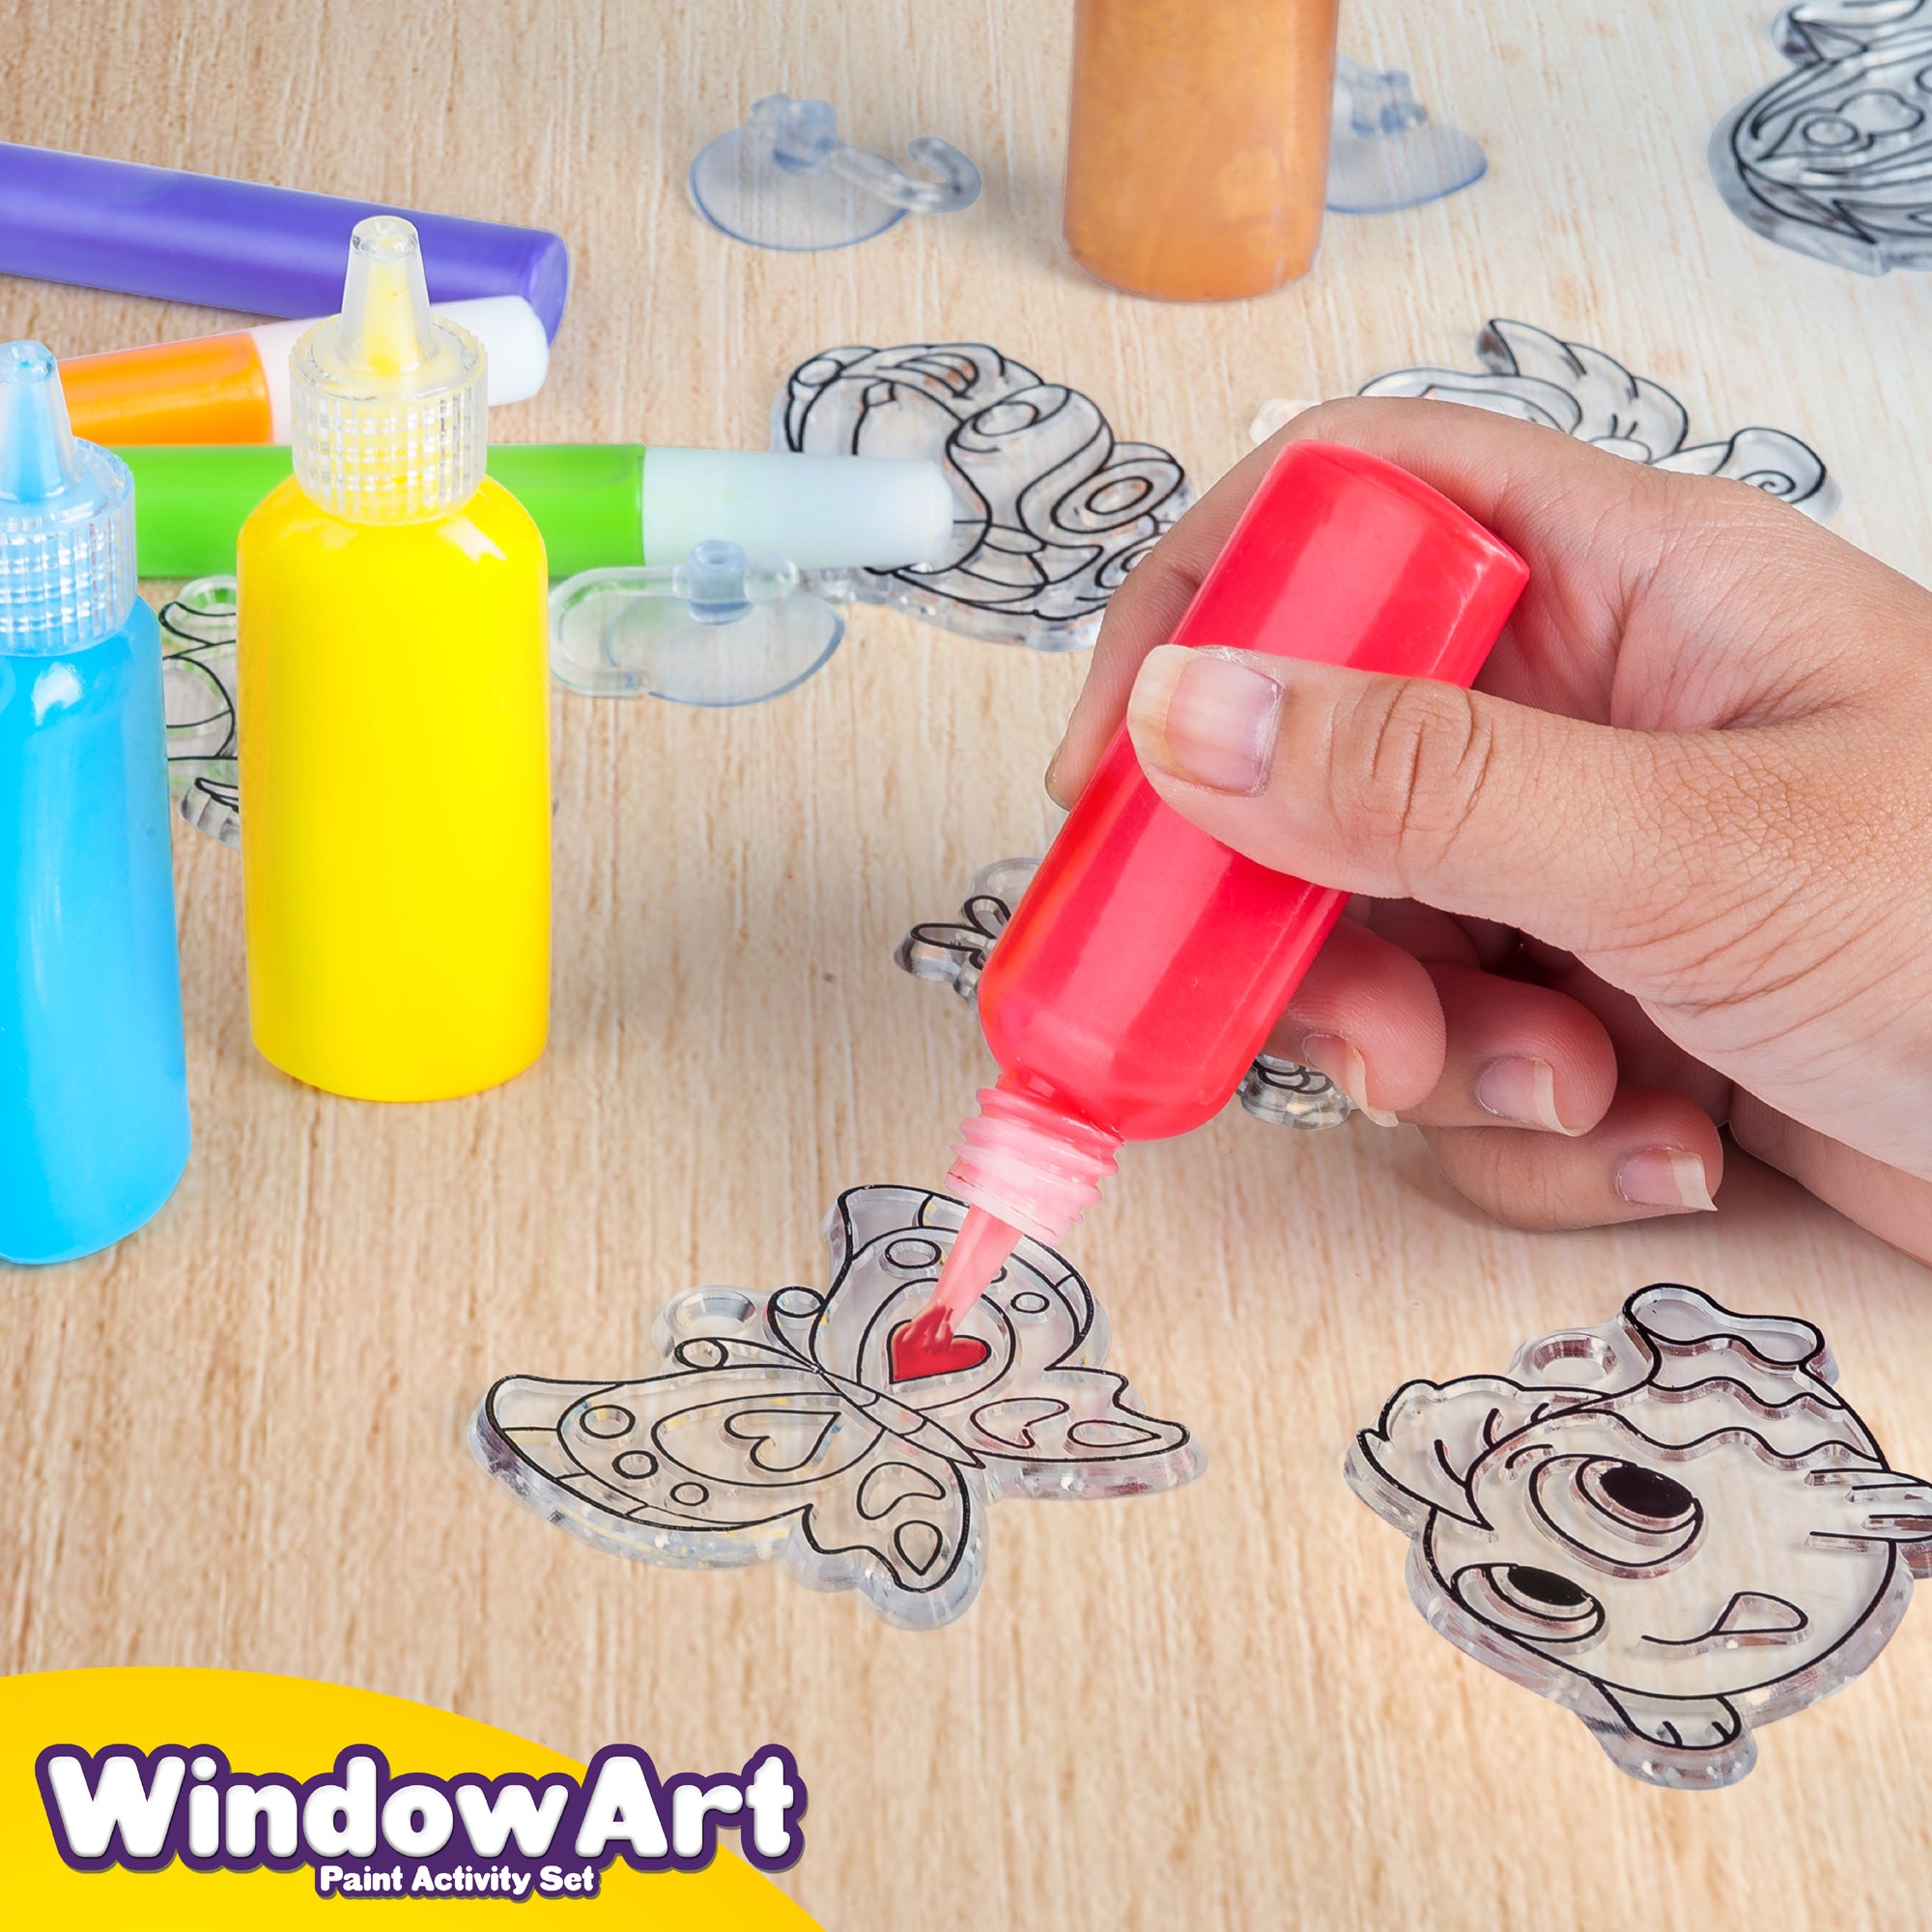 Made By Me Create Your Own Window Art, Paint Your Own DIY Suncatchers, Fun  Staycation Activity or Birthday Party Idea, Arts and Craft Kits for Kids